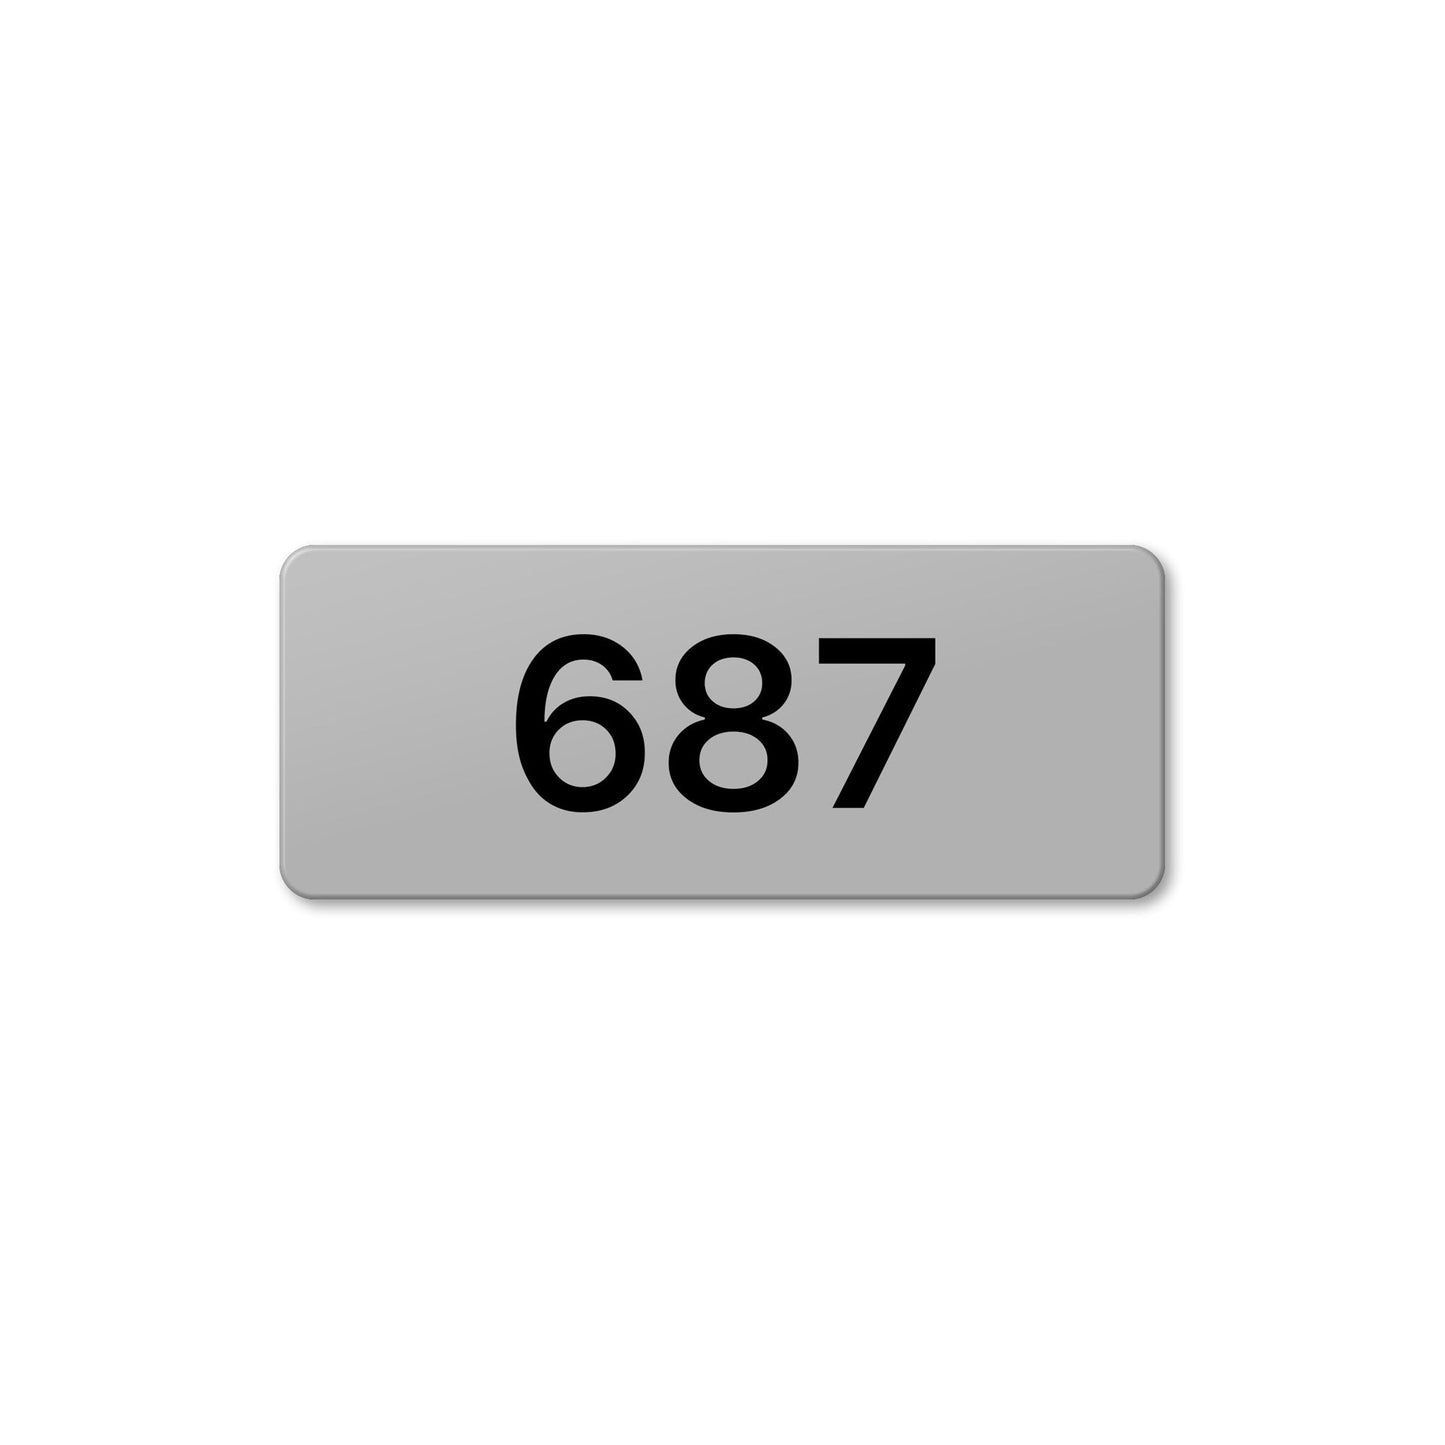 Numeral 687